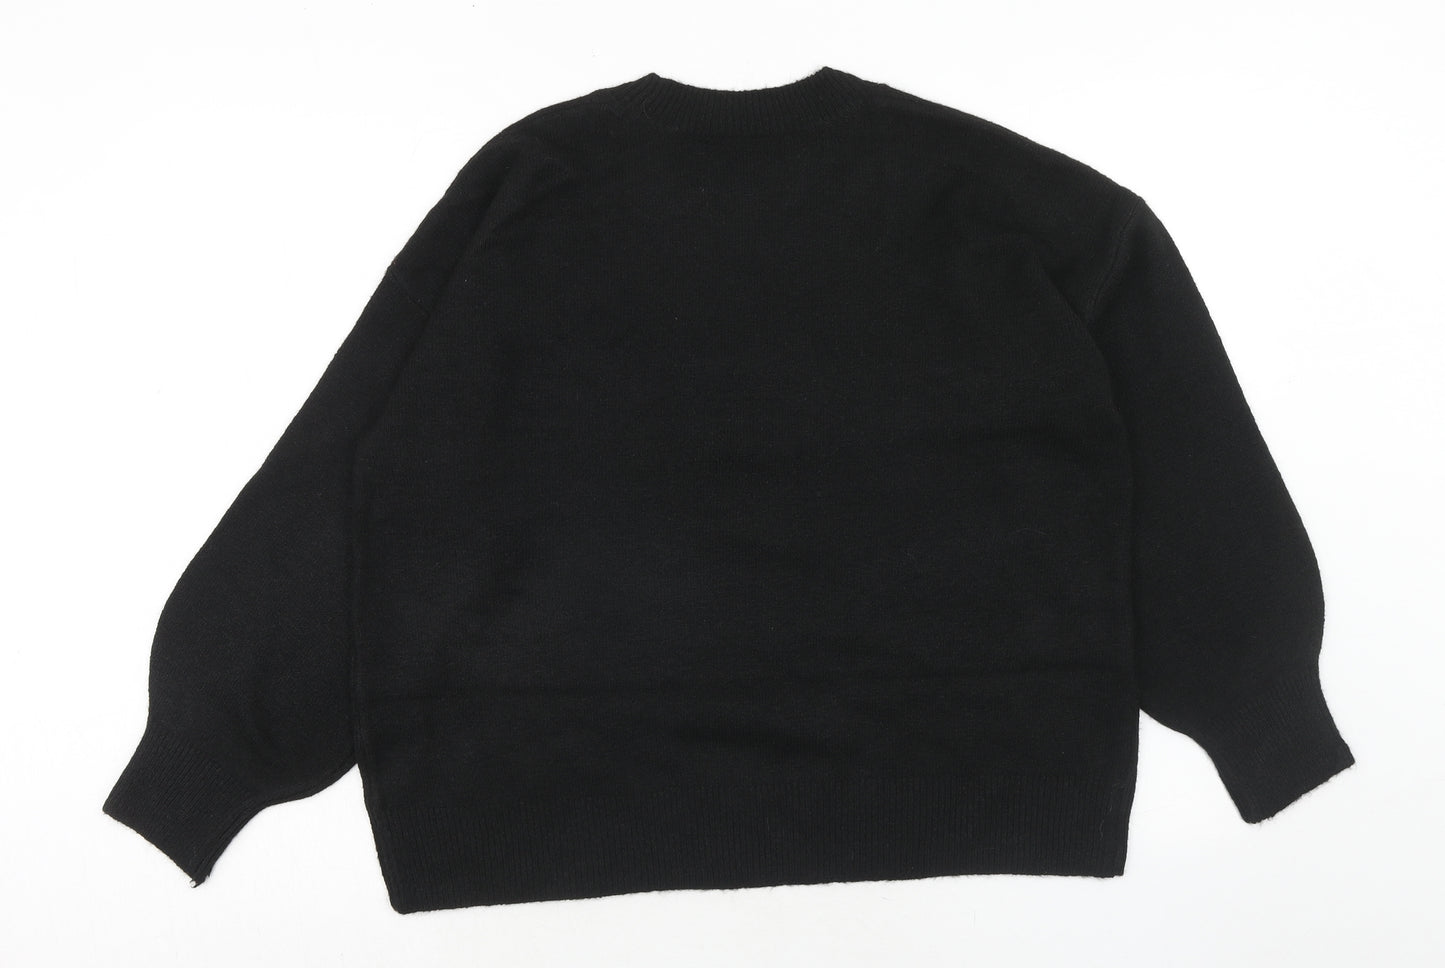 Marks and Spencer Womens Black Crew Neck Acrylic Pullover Jumper Size L - Ho Ho Ho Christmas